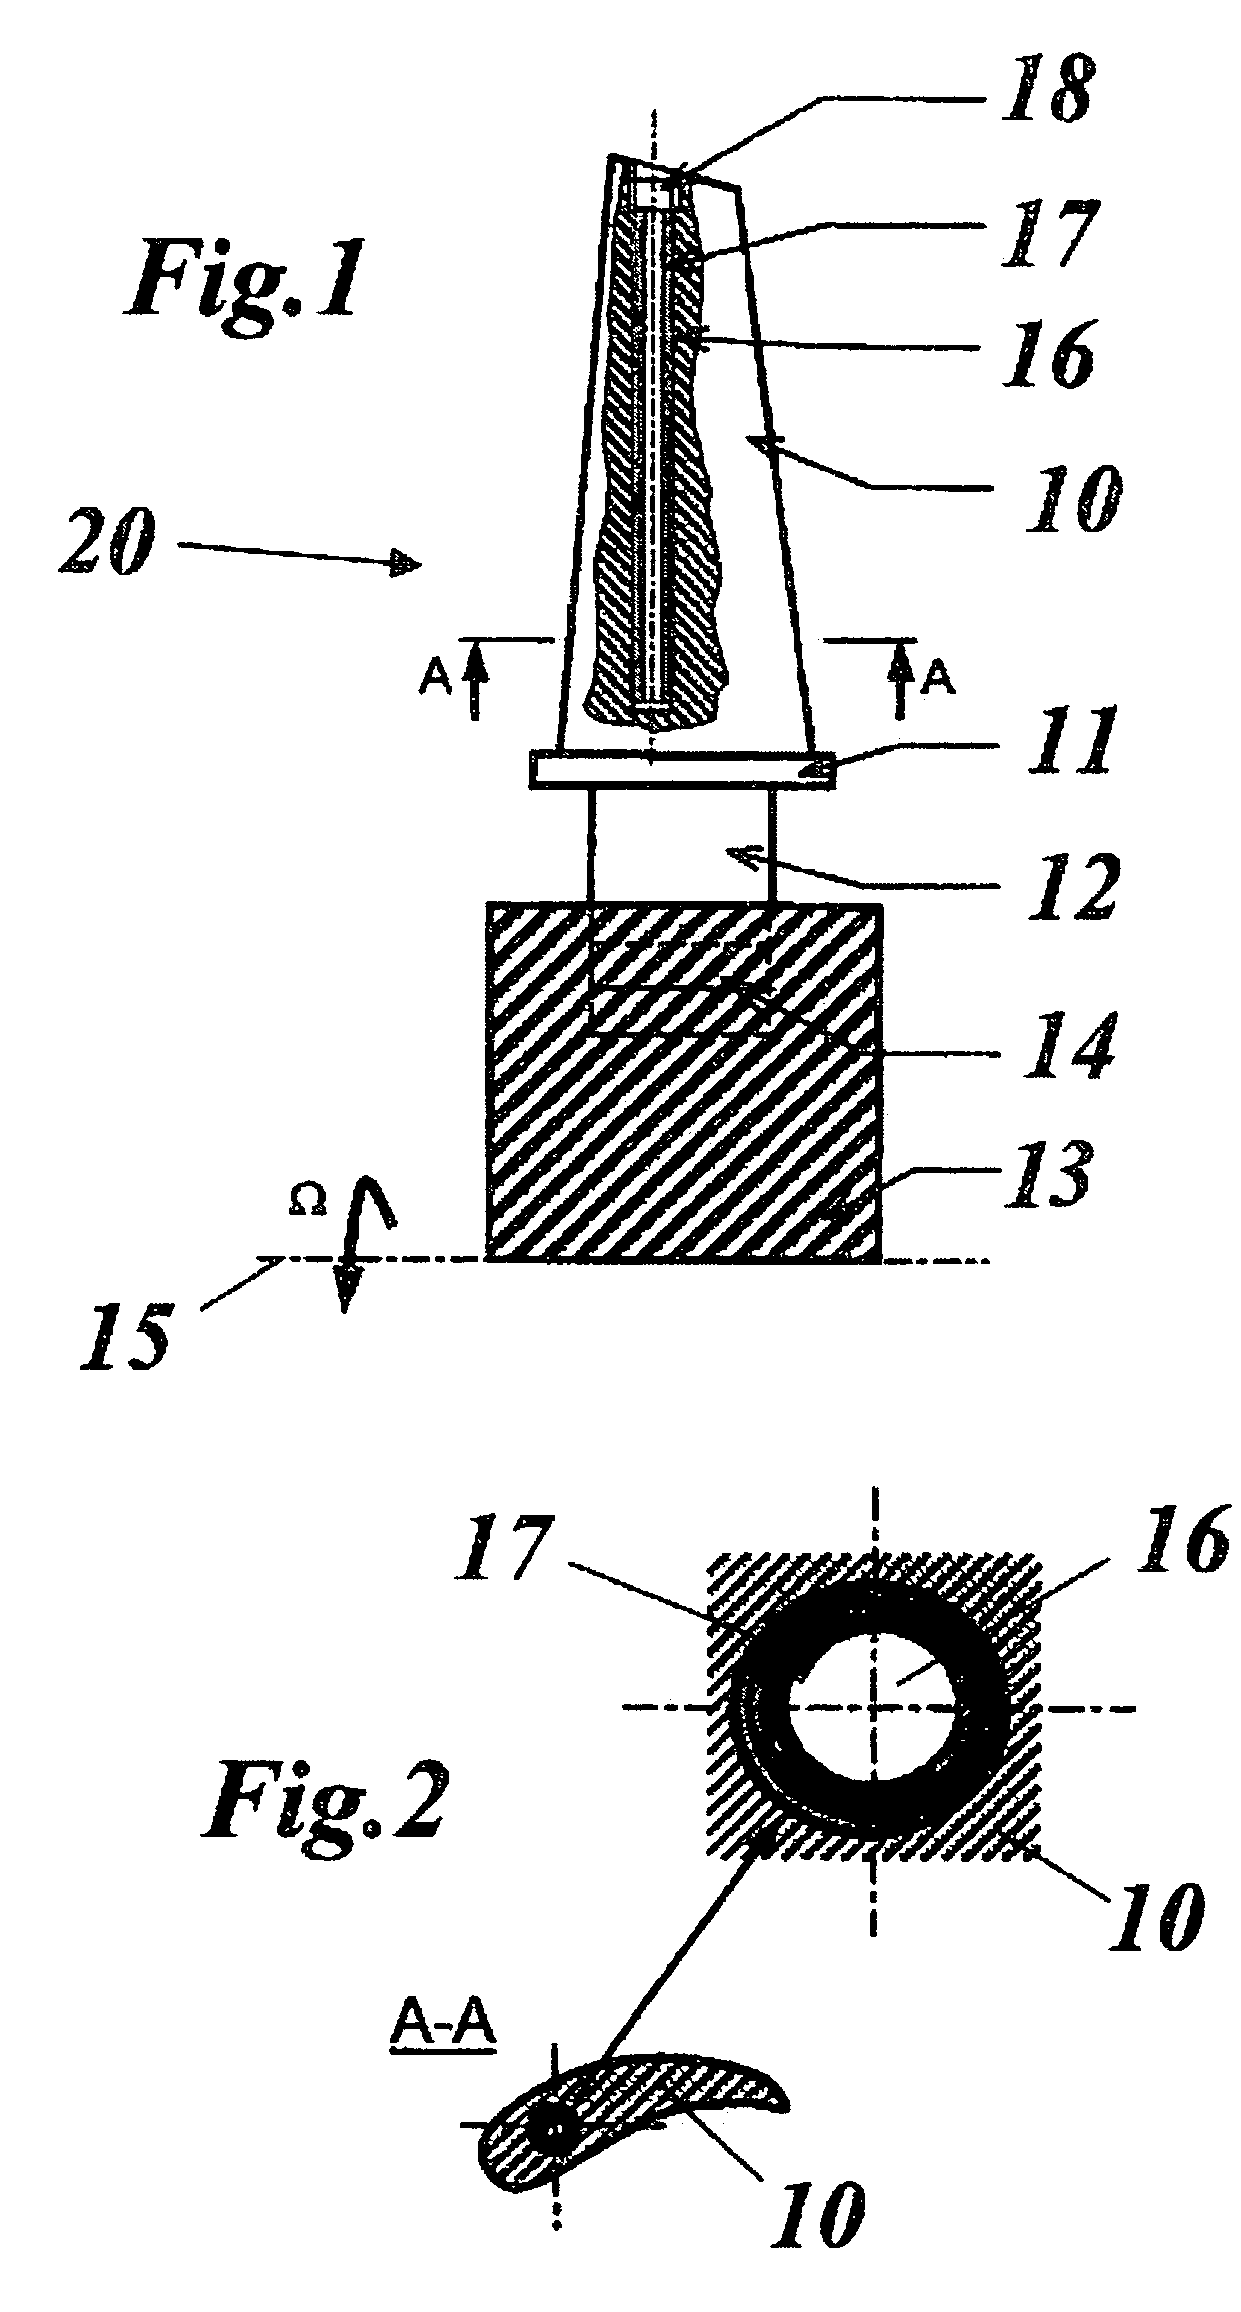 Damping arrangement for a blade of an axial turbine